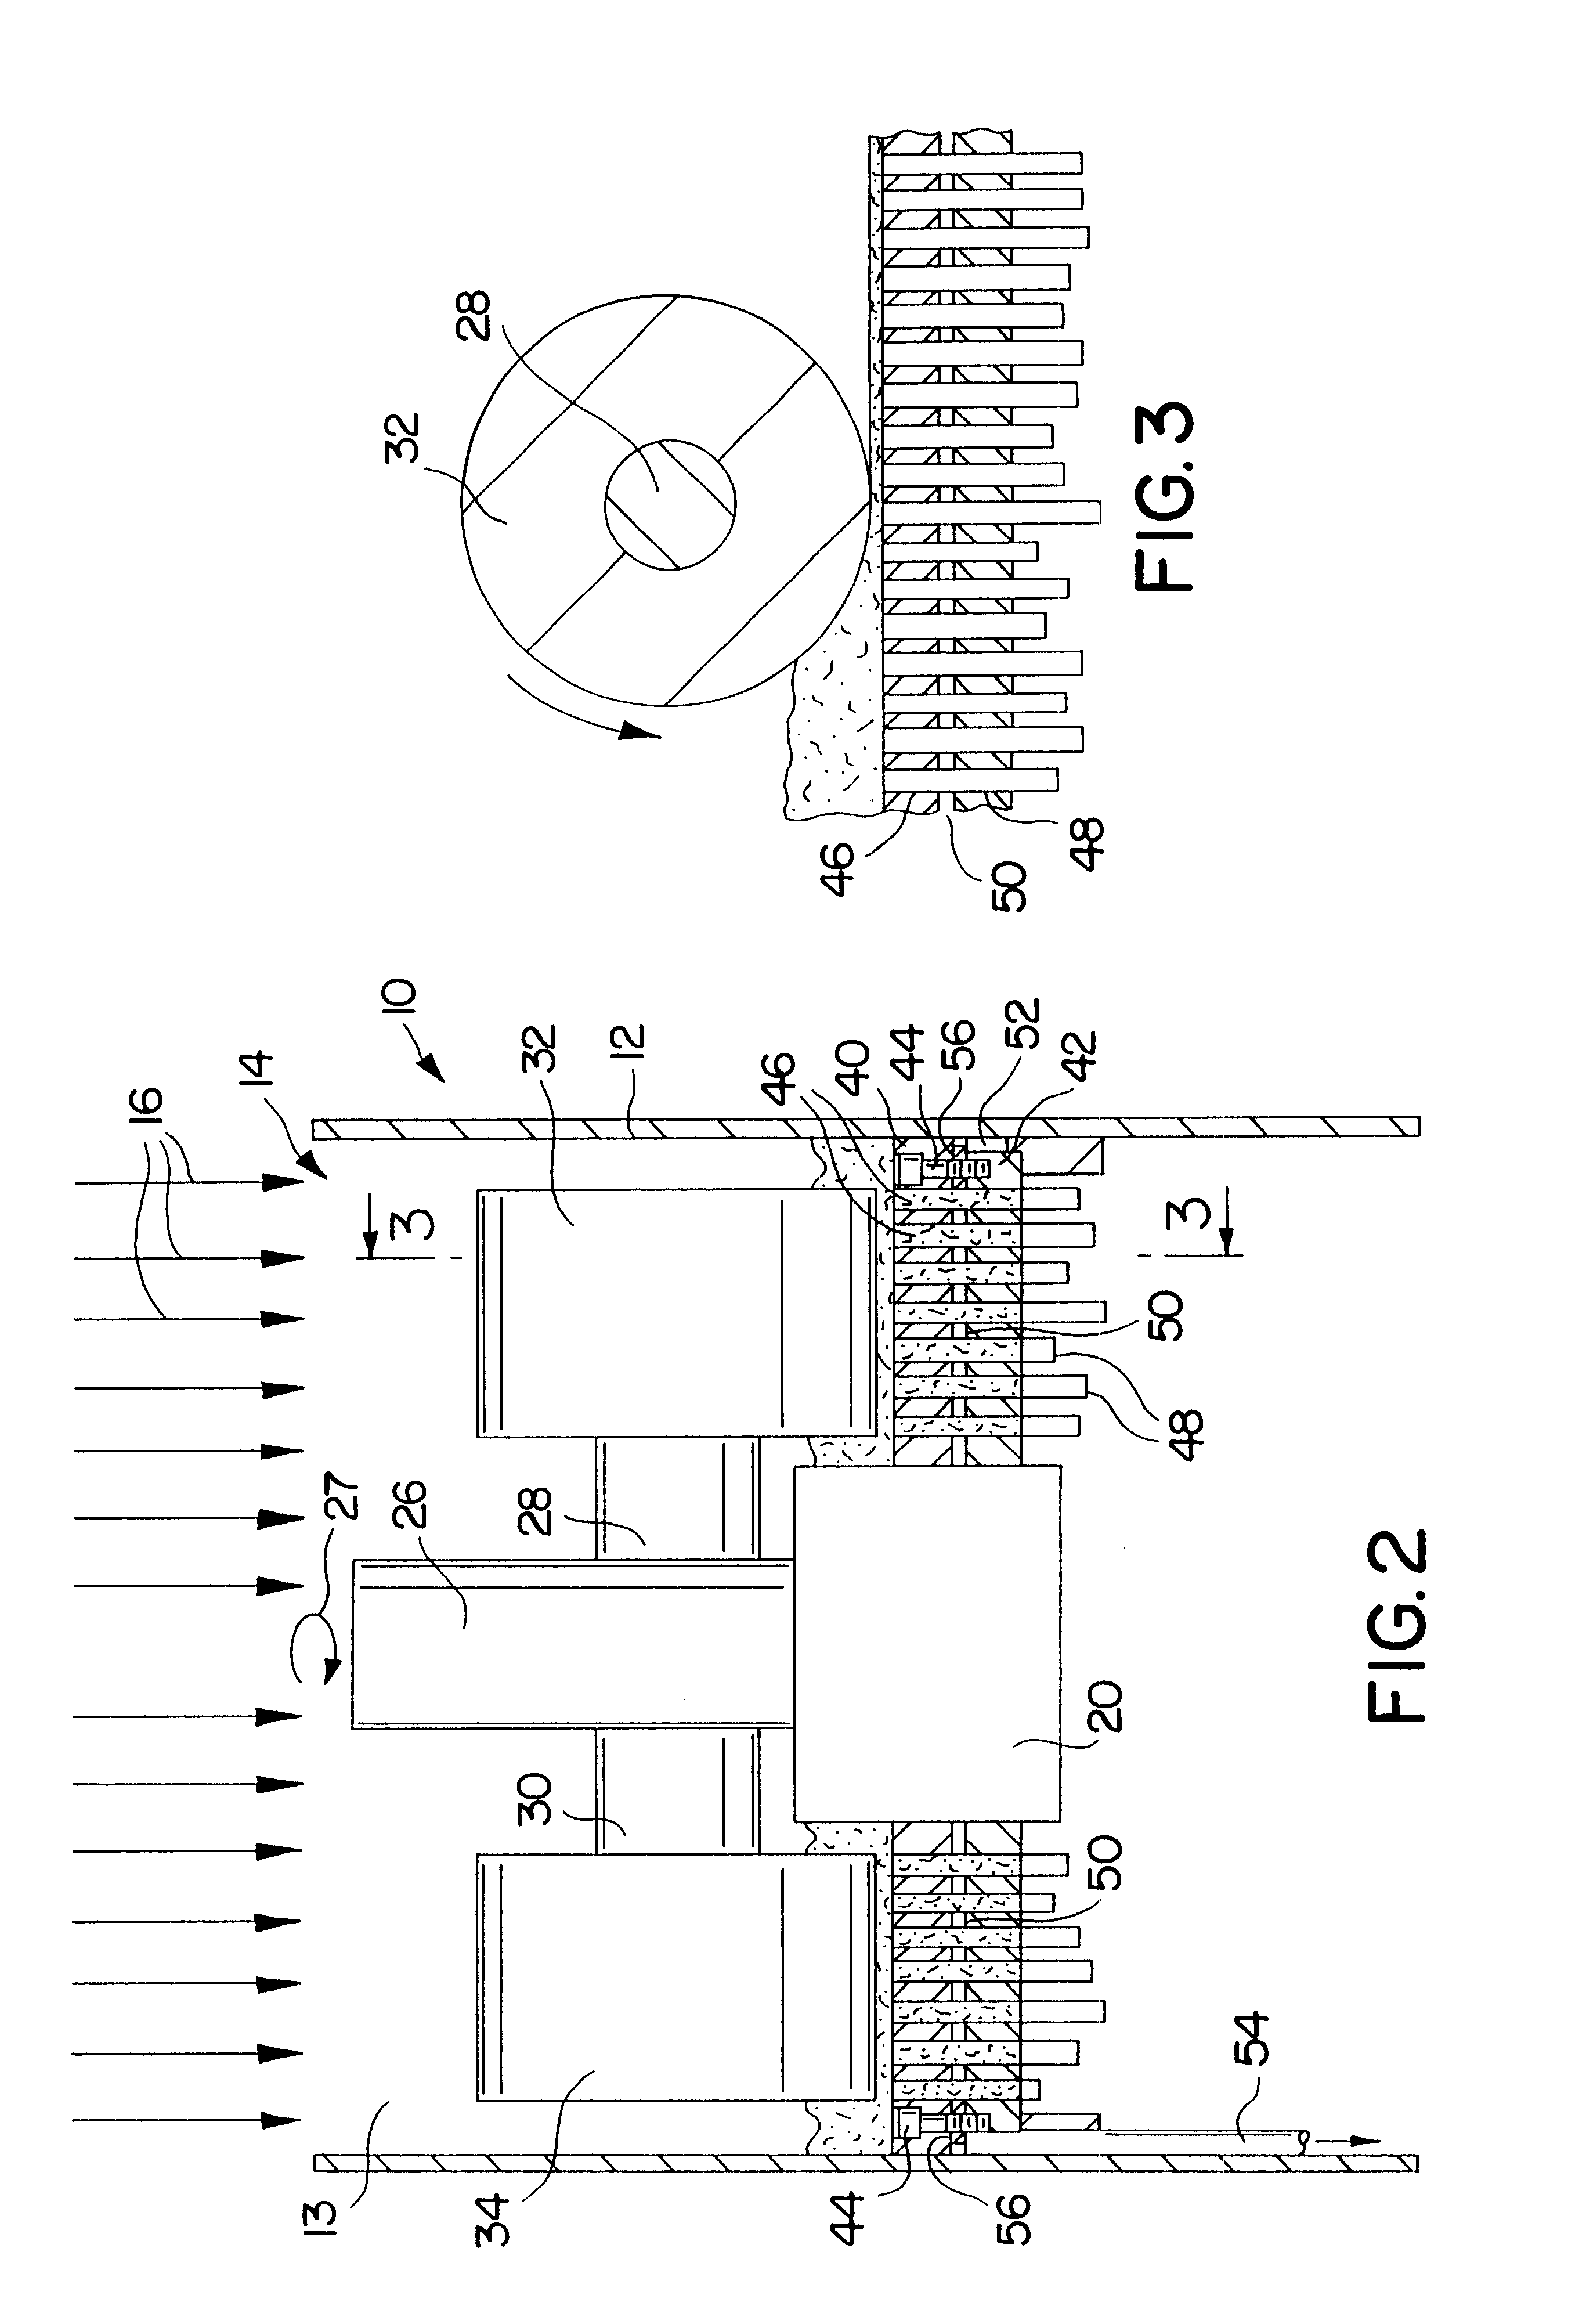 Apparatus for dewatering and pelletizing particulate fuel